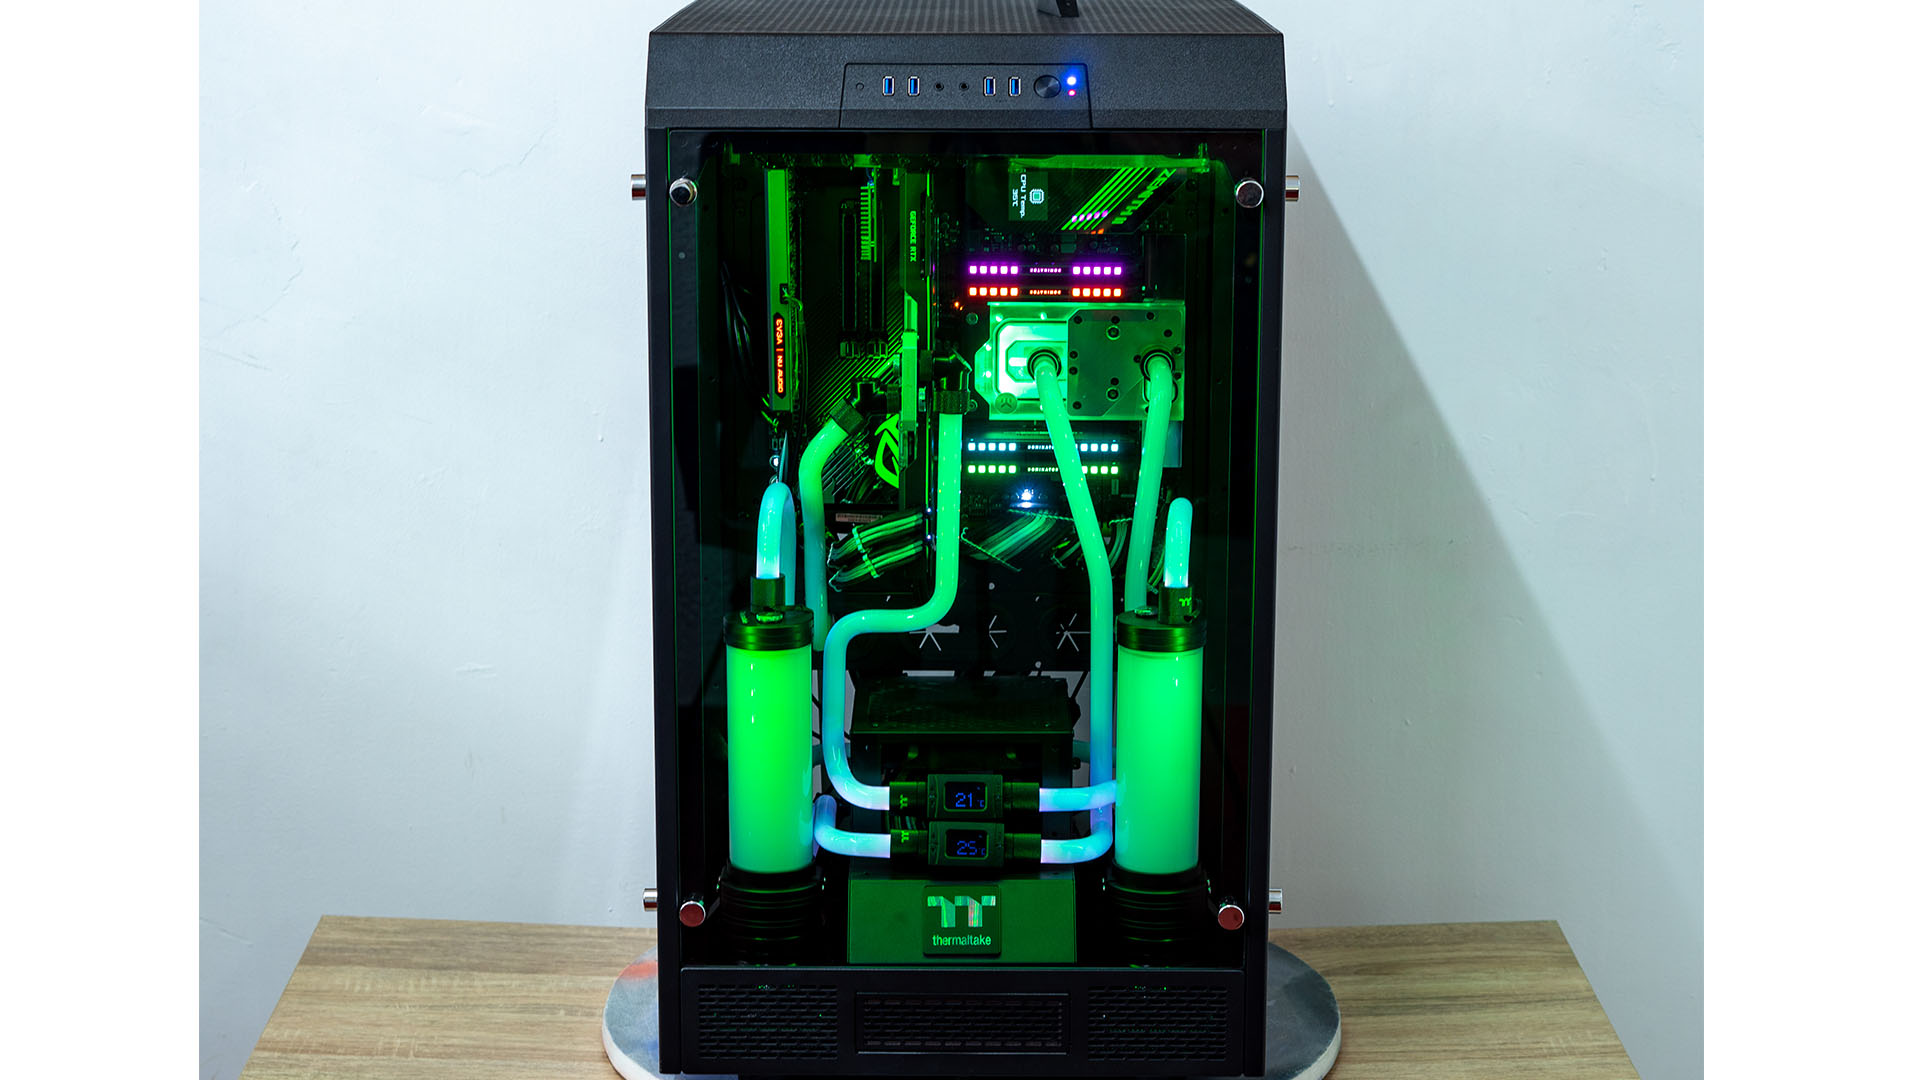 The AMD threadripper gaming PC with green collant and RGB lighting